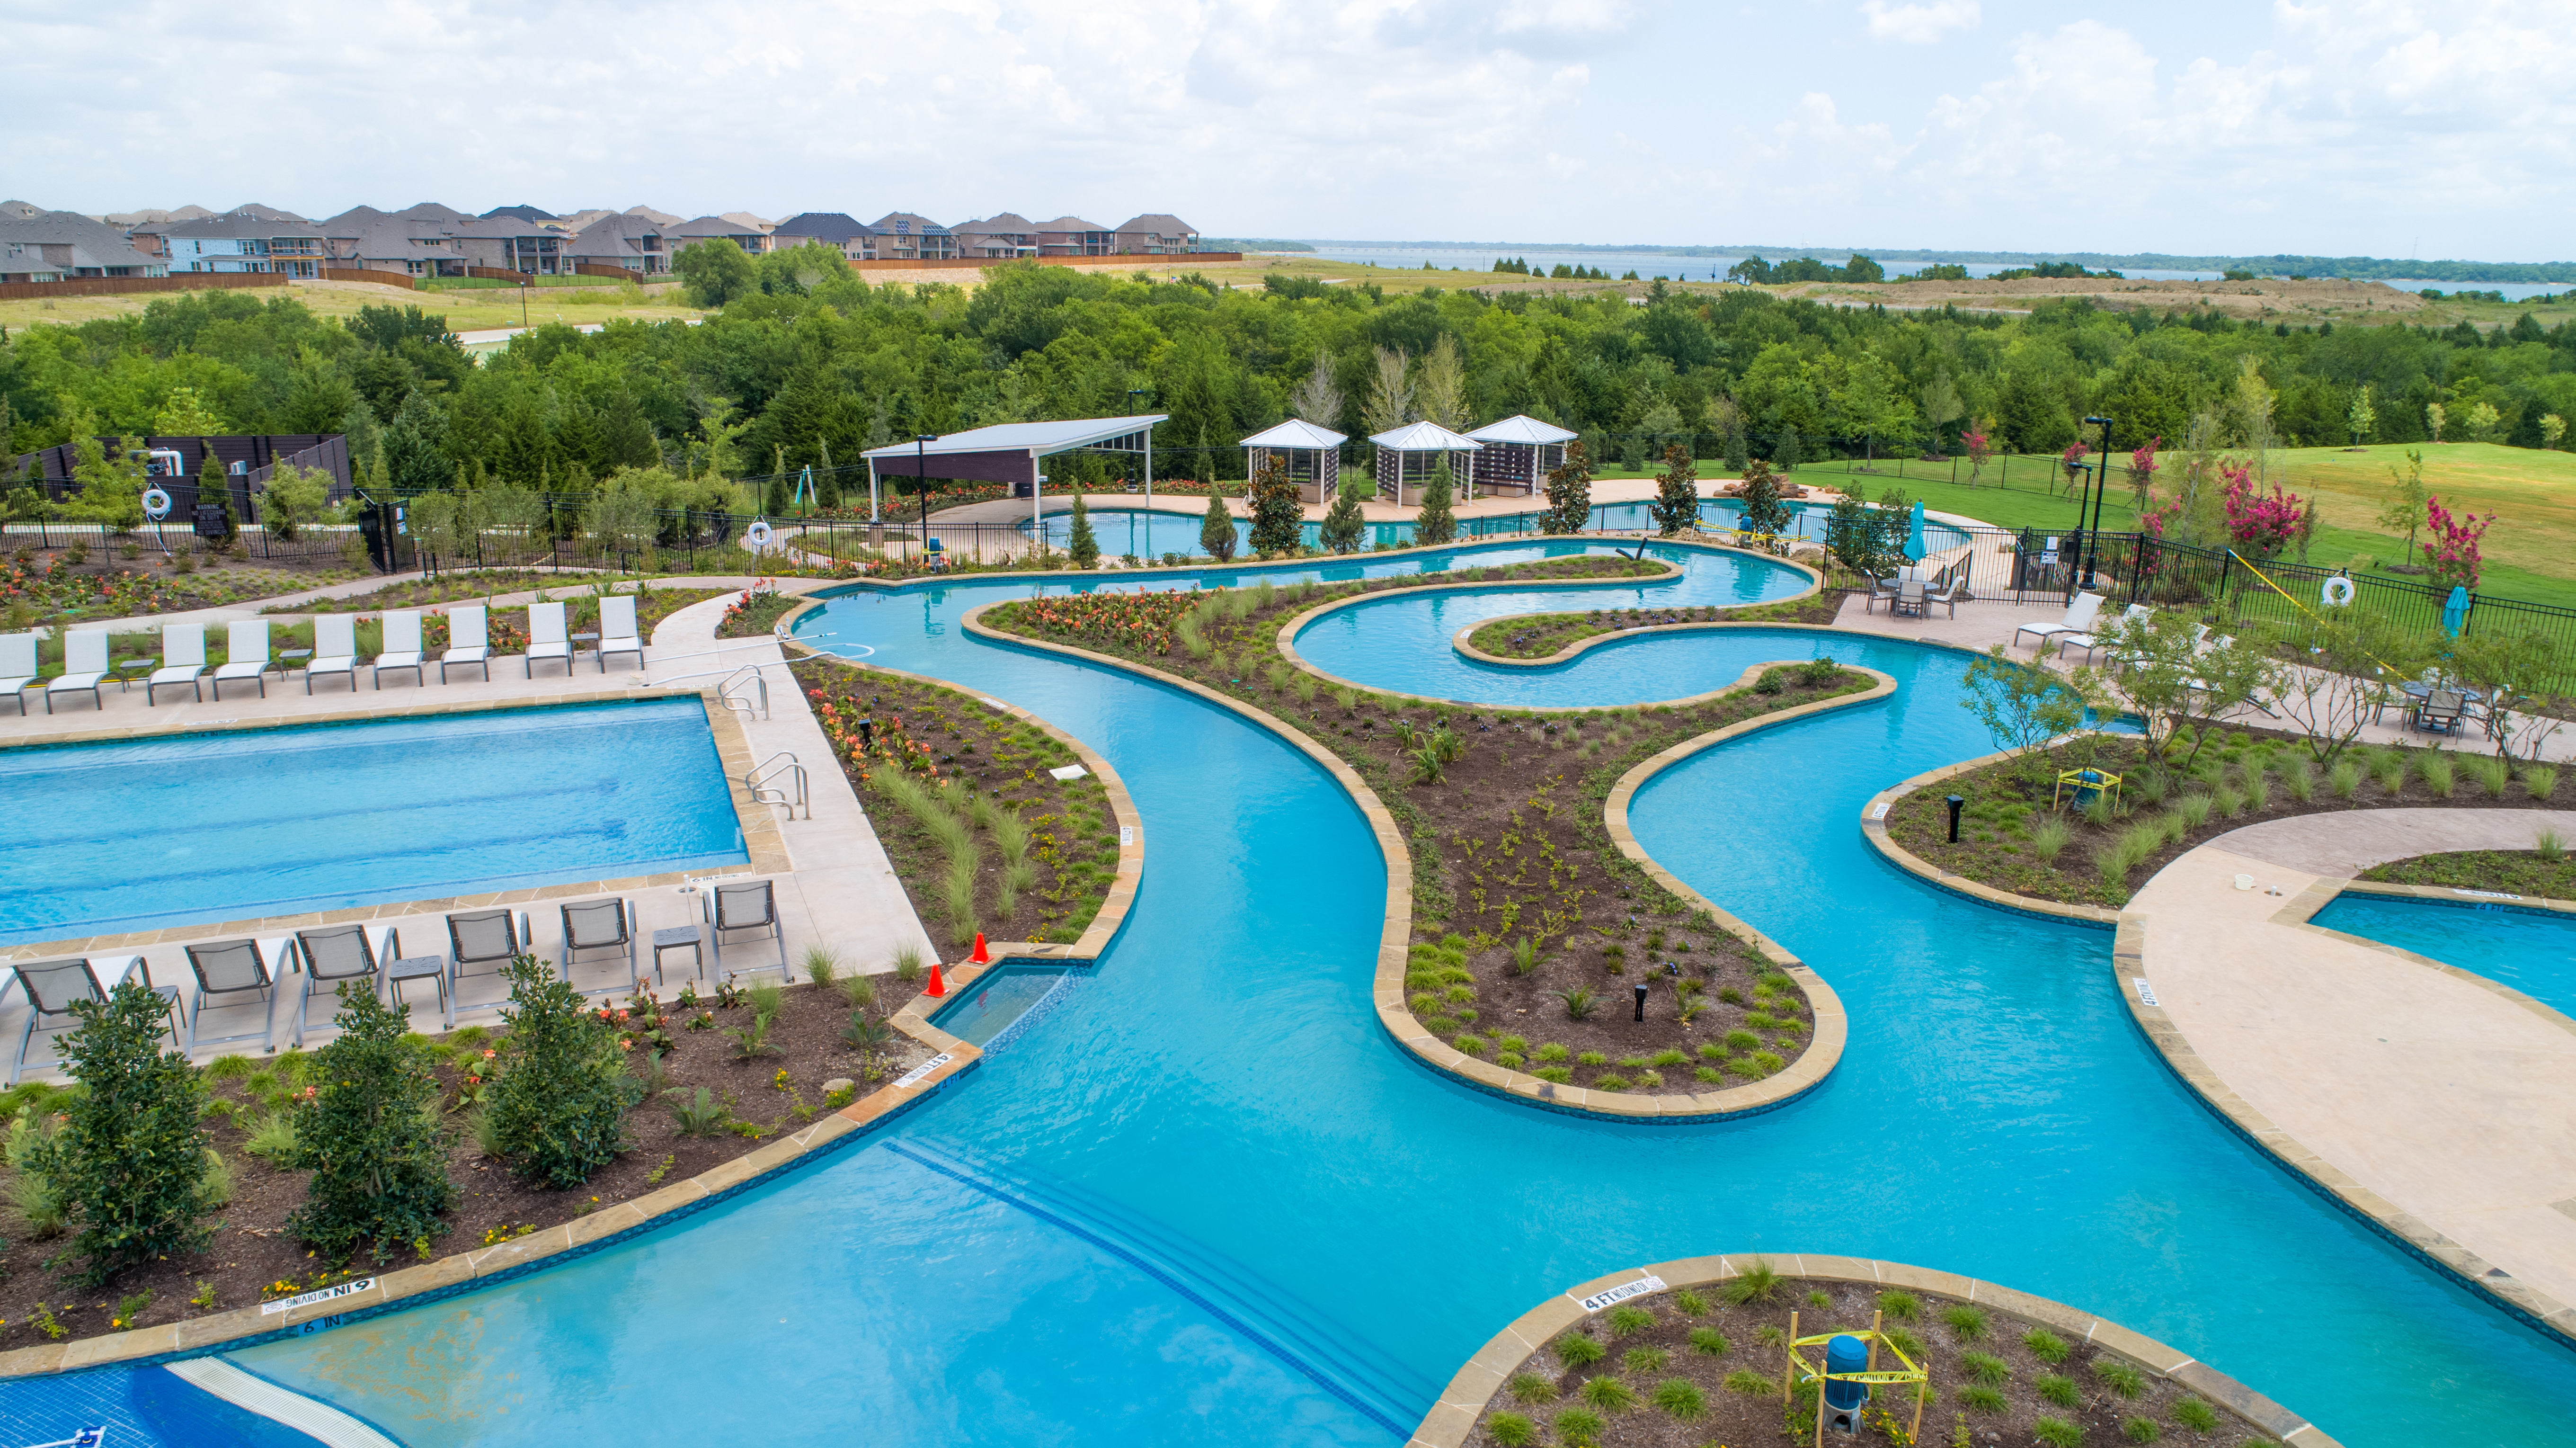 Club Inspiration Pools Now Open! Inspiration Texas